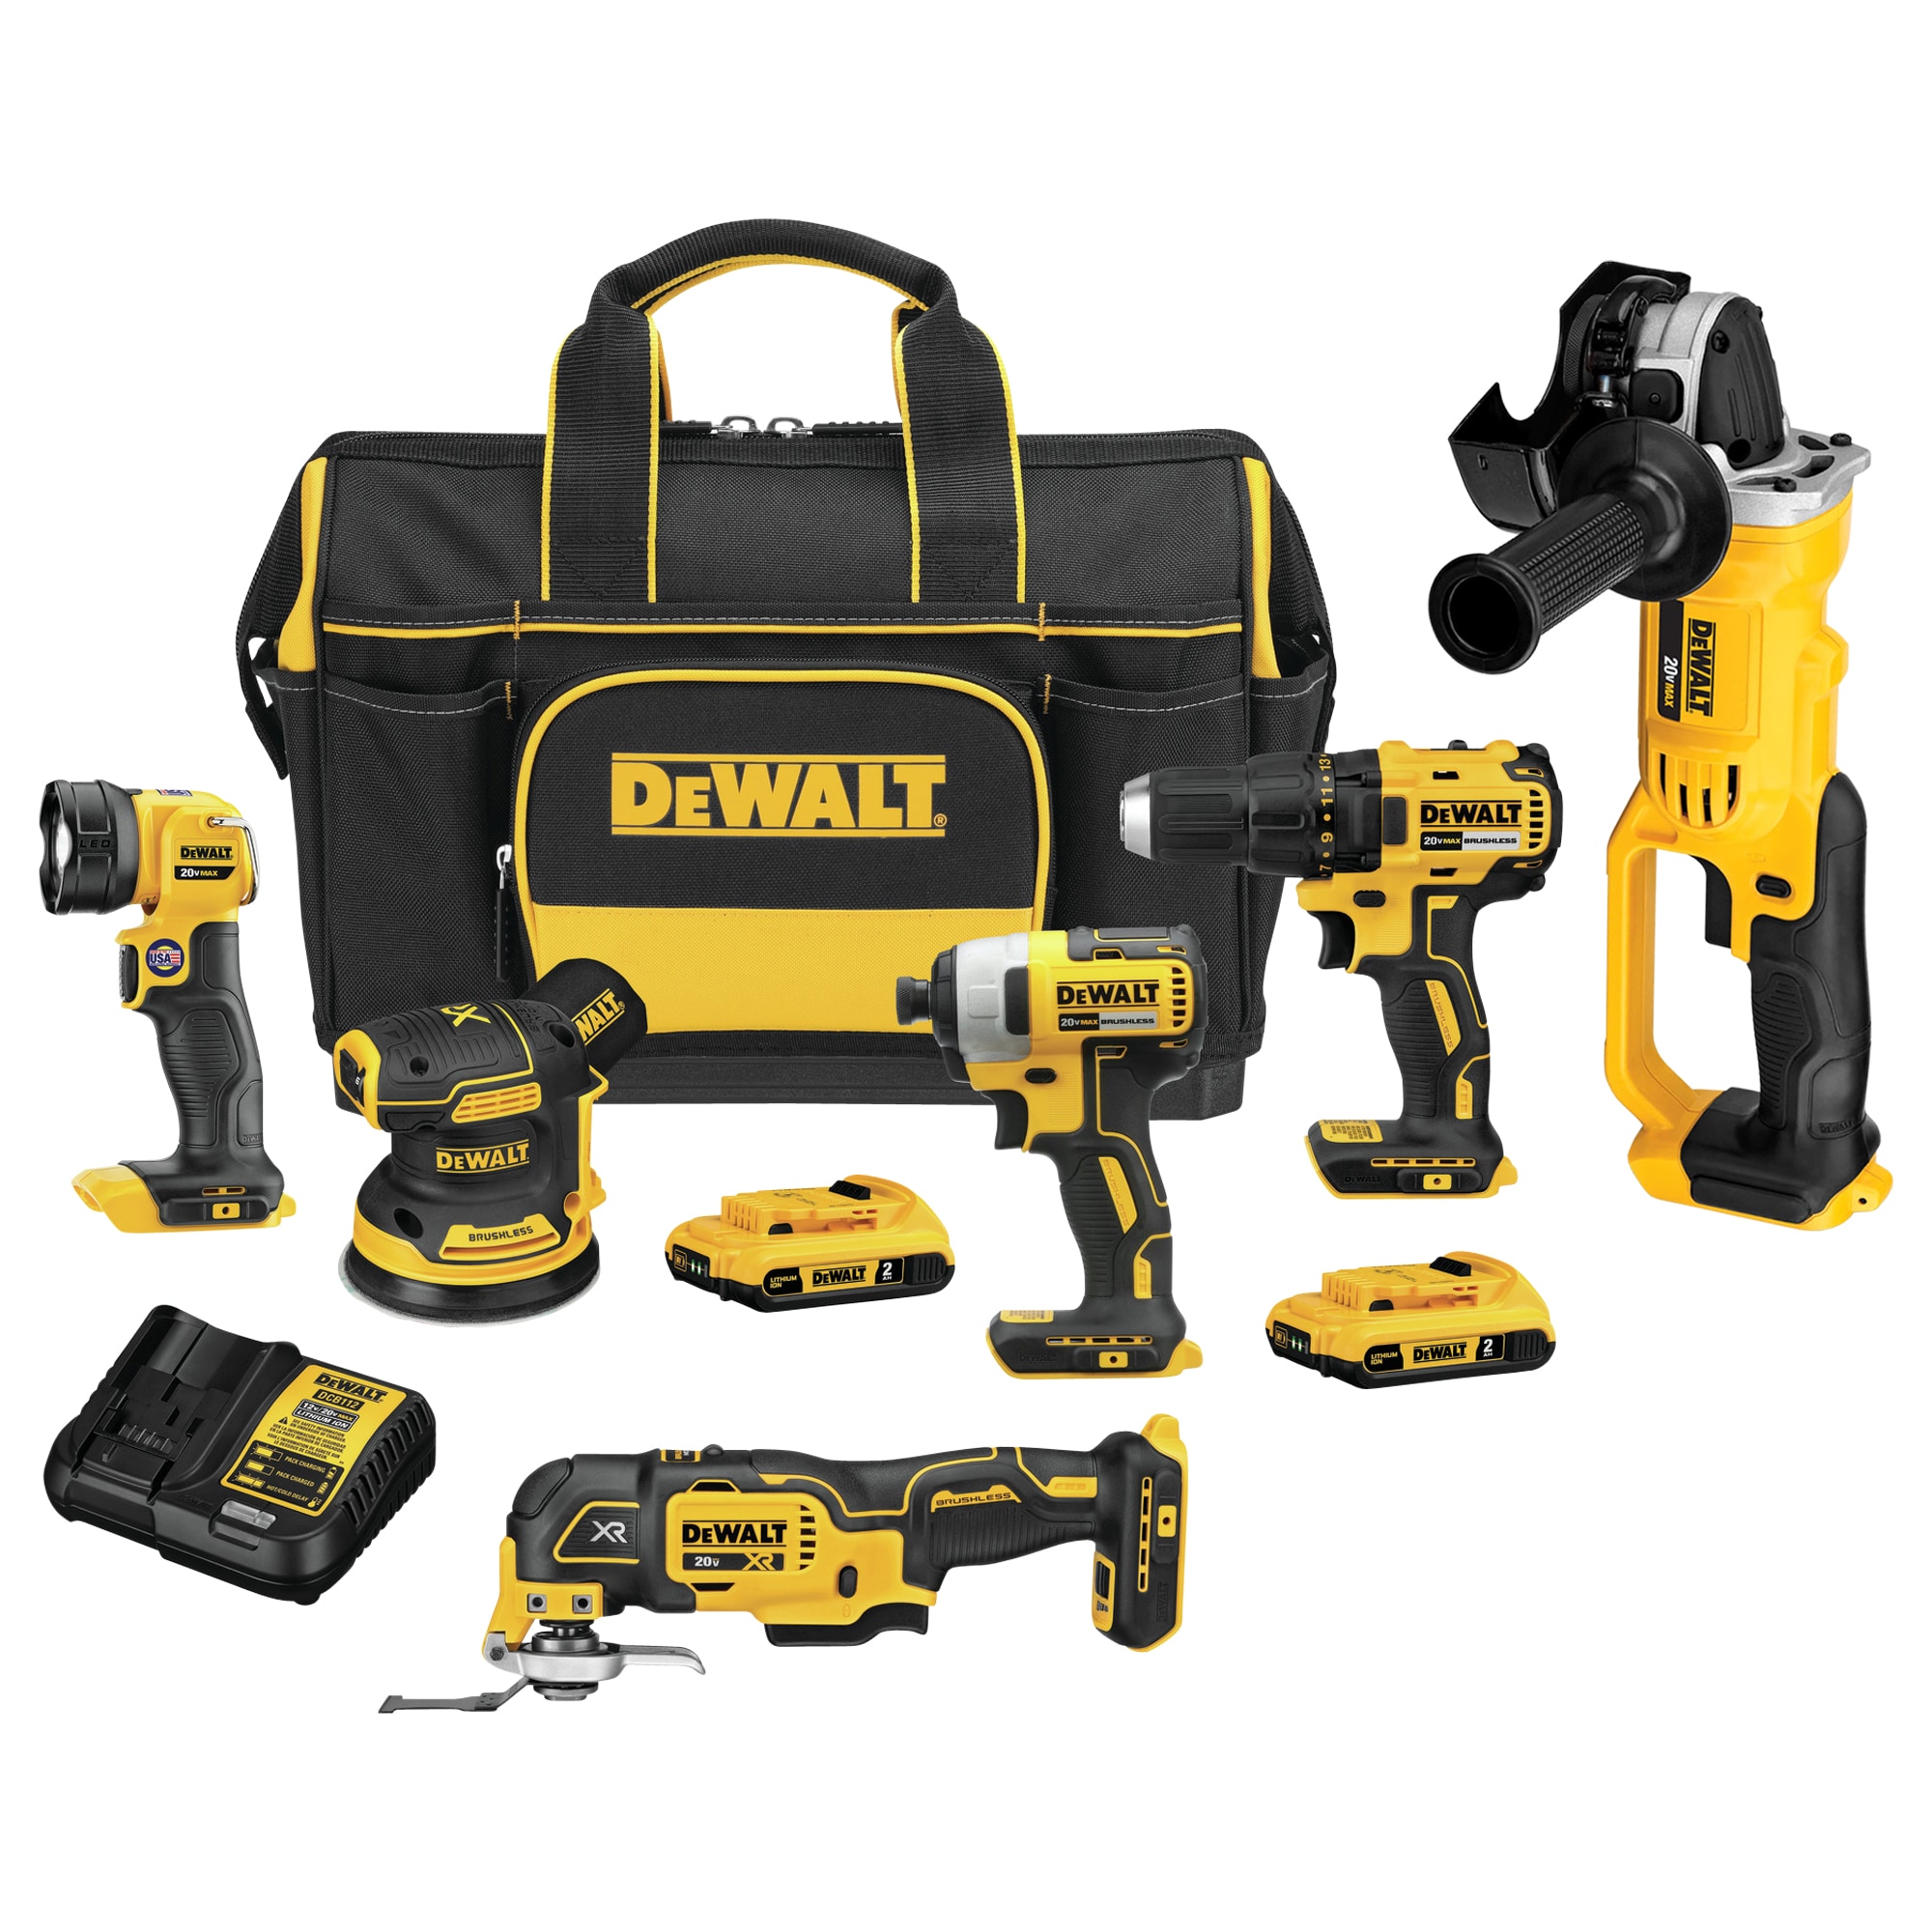 DEWALT 5-Tool 20-Volt Max Brushless Power Tool Combo Kit with Soft Case (2-Batteries and charger Included) & 4.5-in 20-Volt Trigger Switch Cordless